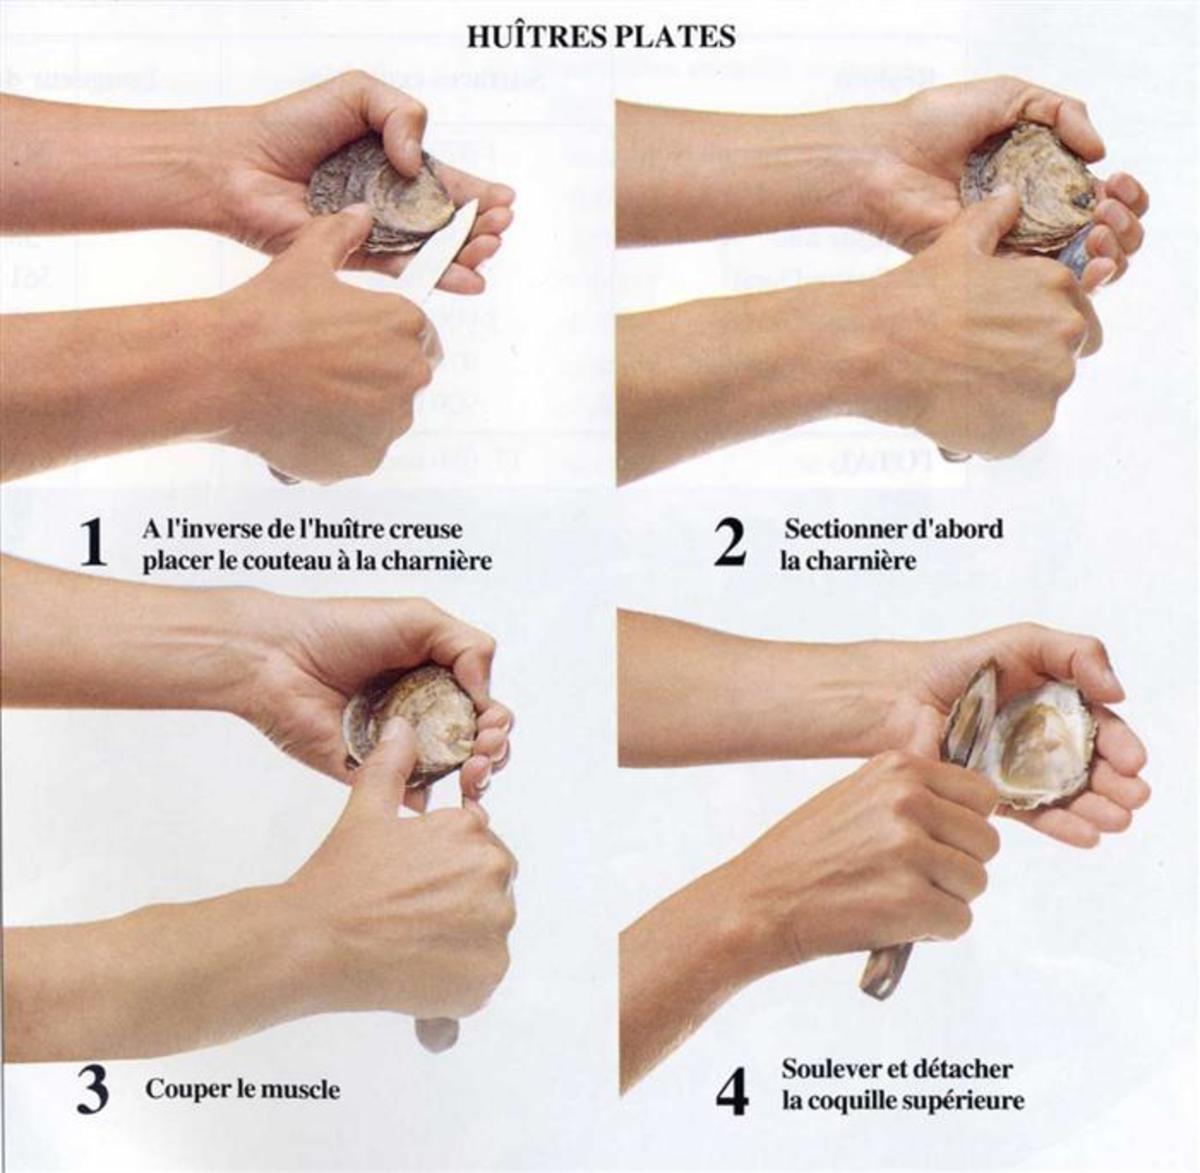 How to open an oyster